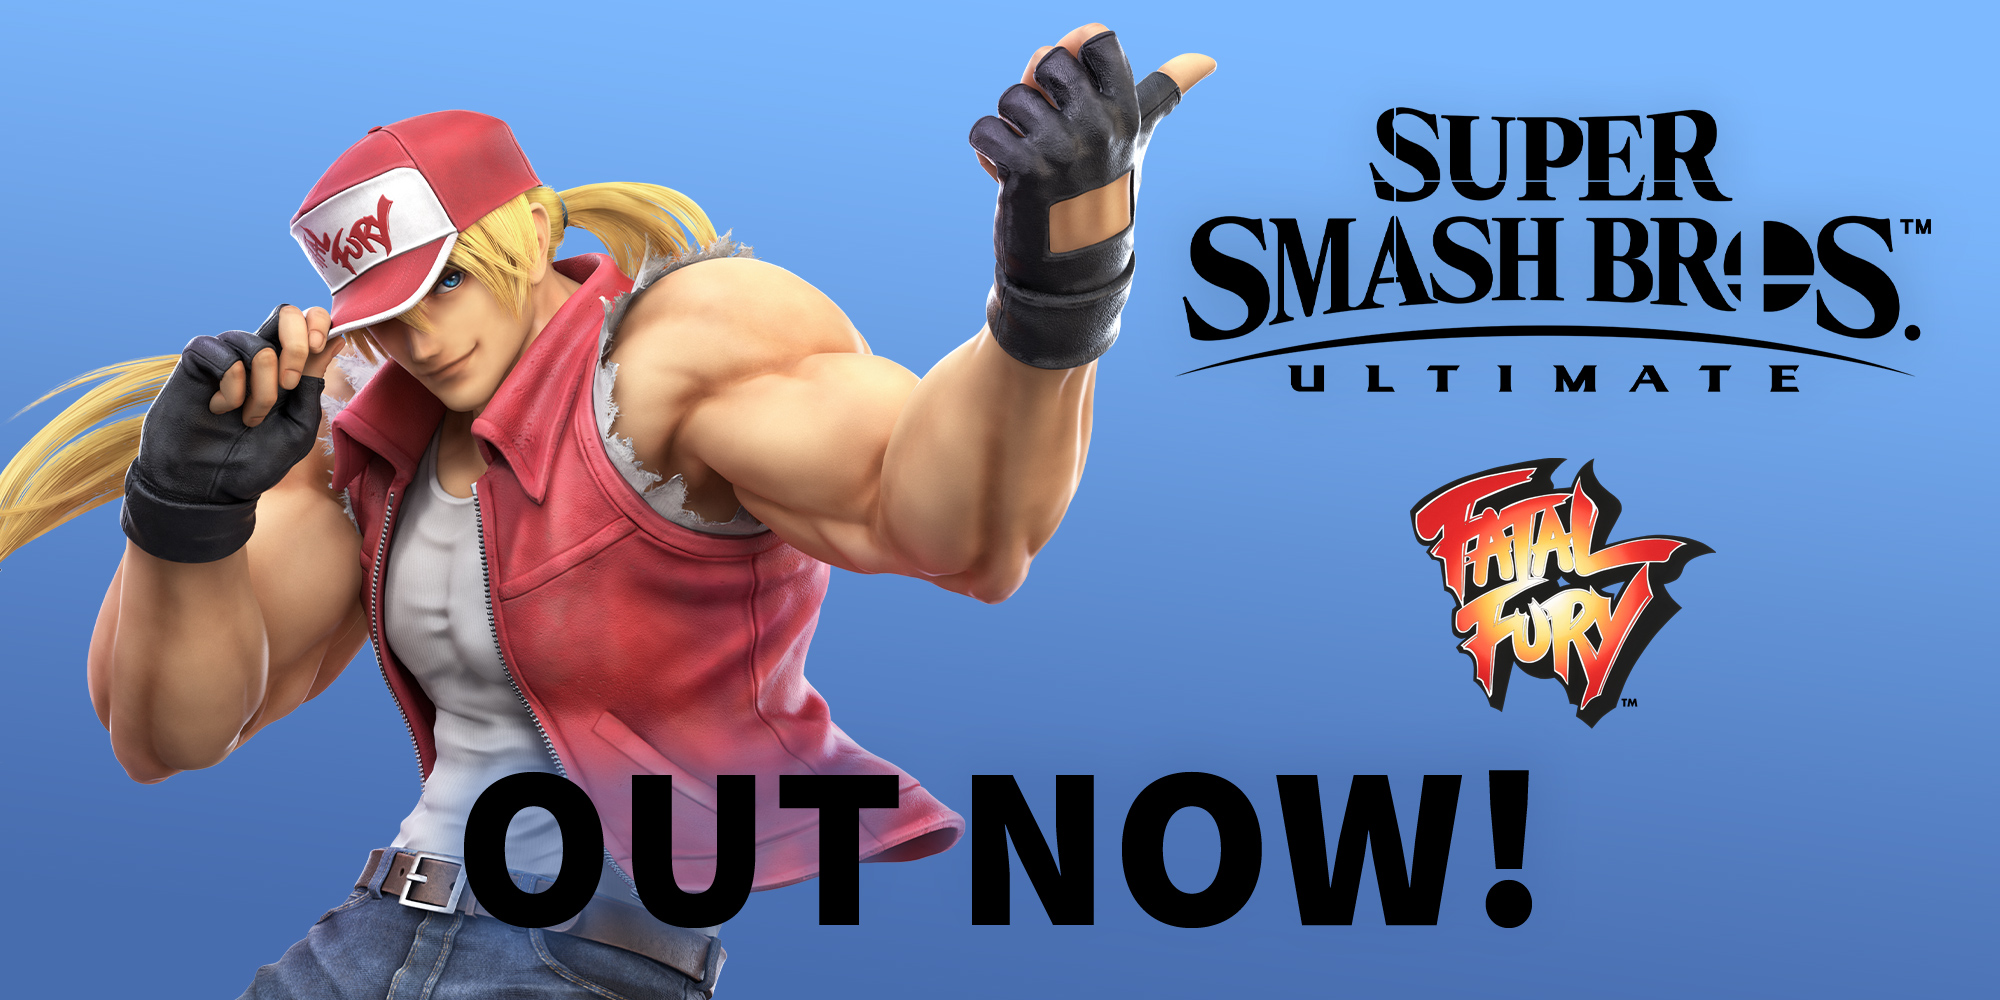 FATAL FURY’s Terry Bogard joins the fight in Super Smash Bros. Ultimate…today!